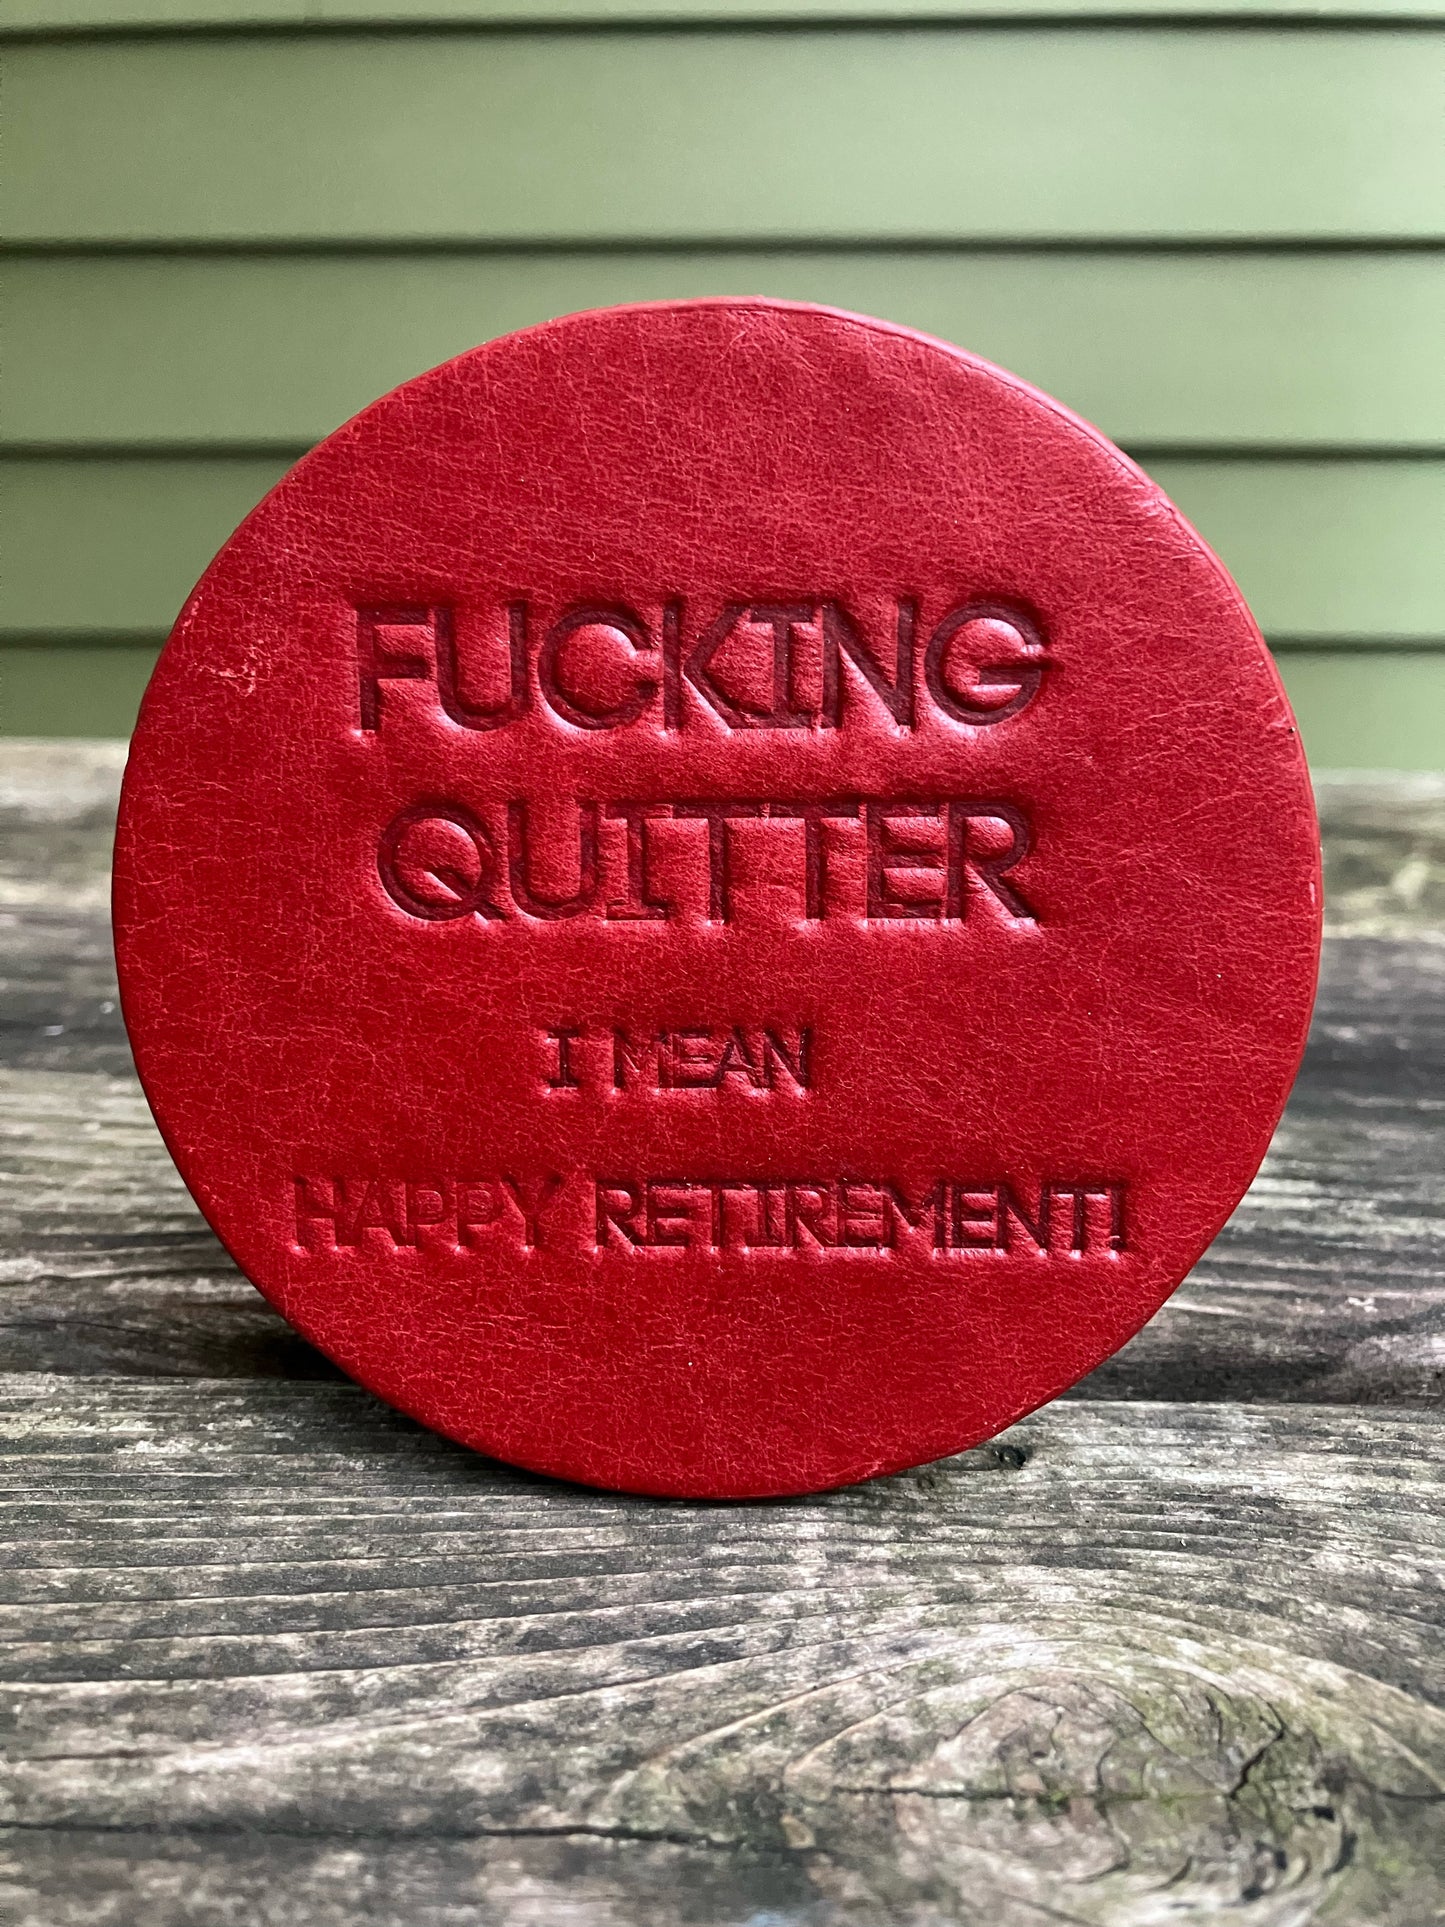 Leather Coaster - Fucking Quitter Happy Retirement